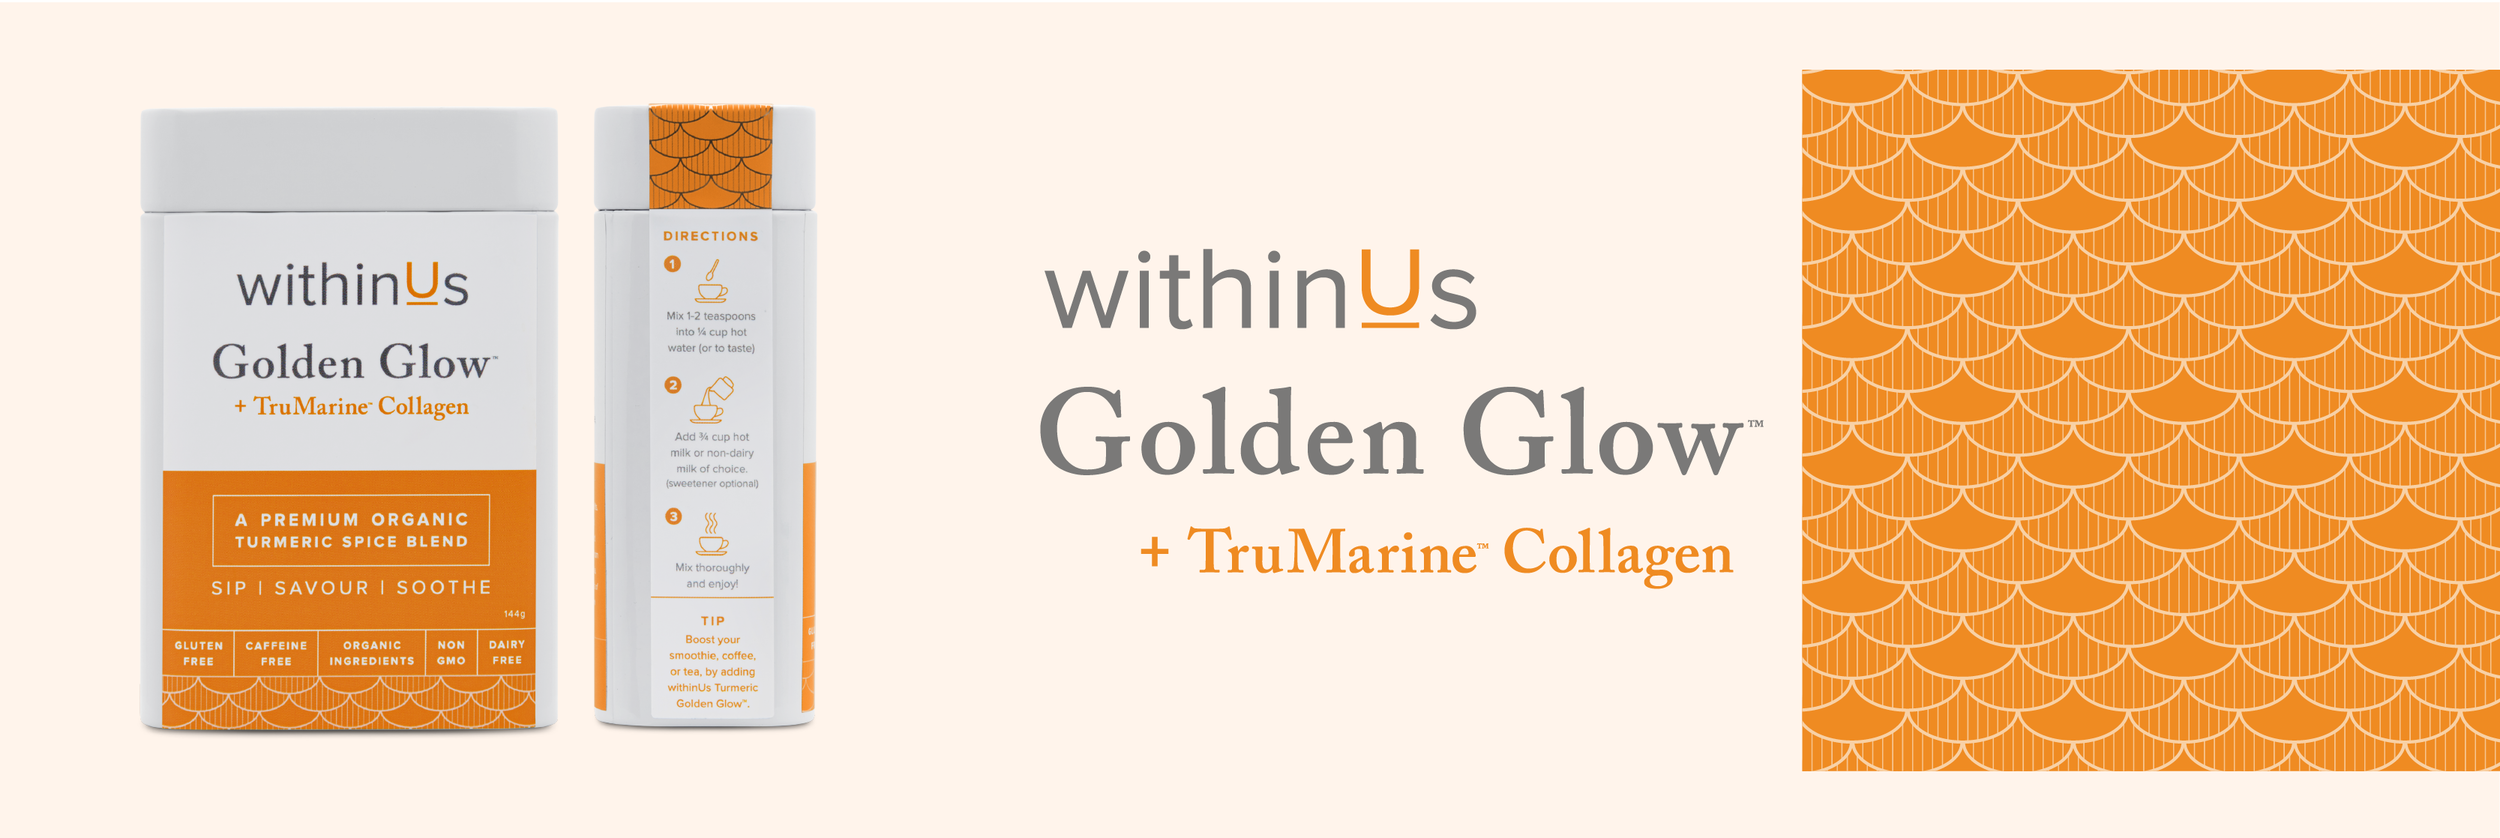 withinUs-Product-Design_Golden_Glow.png